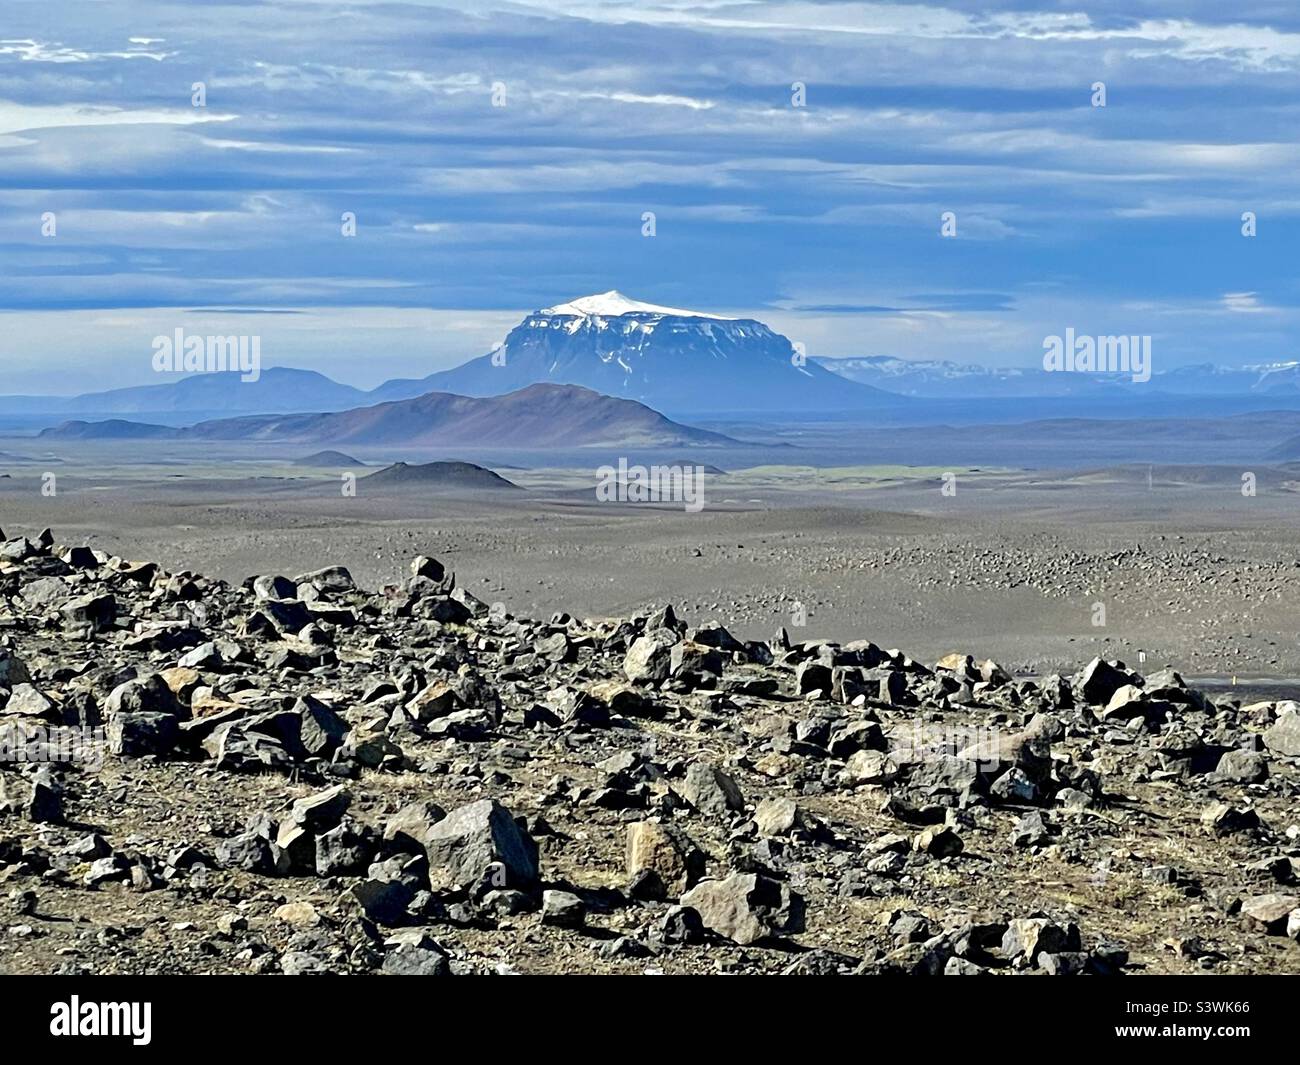 Lava fields of eastern Iceland with snow capped volcano in the distance Stock Photo